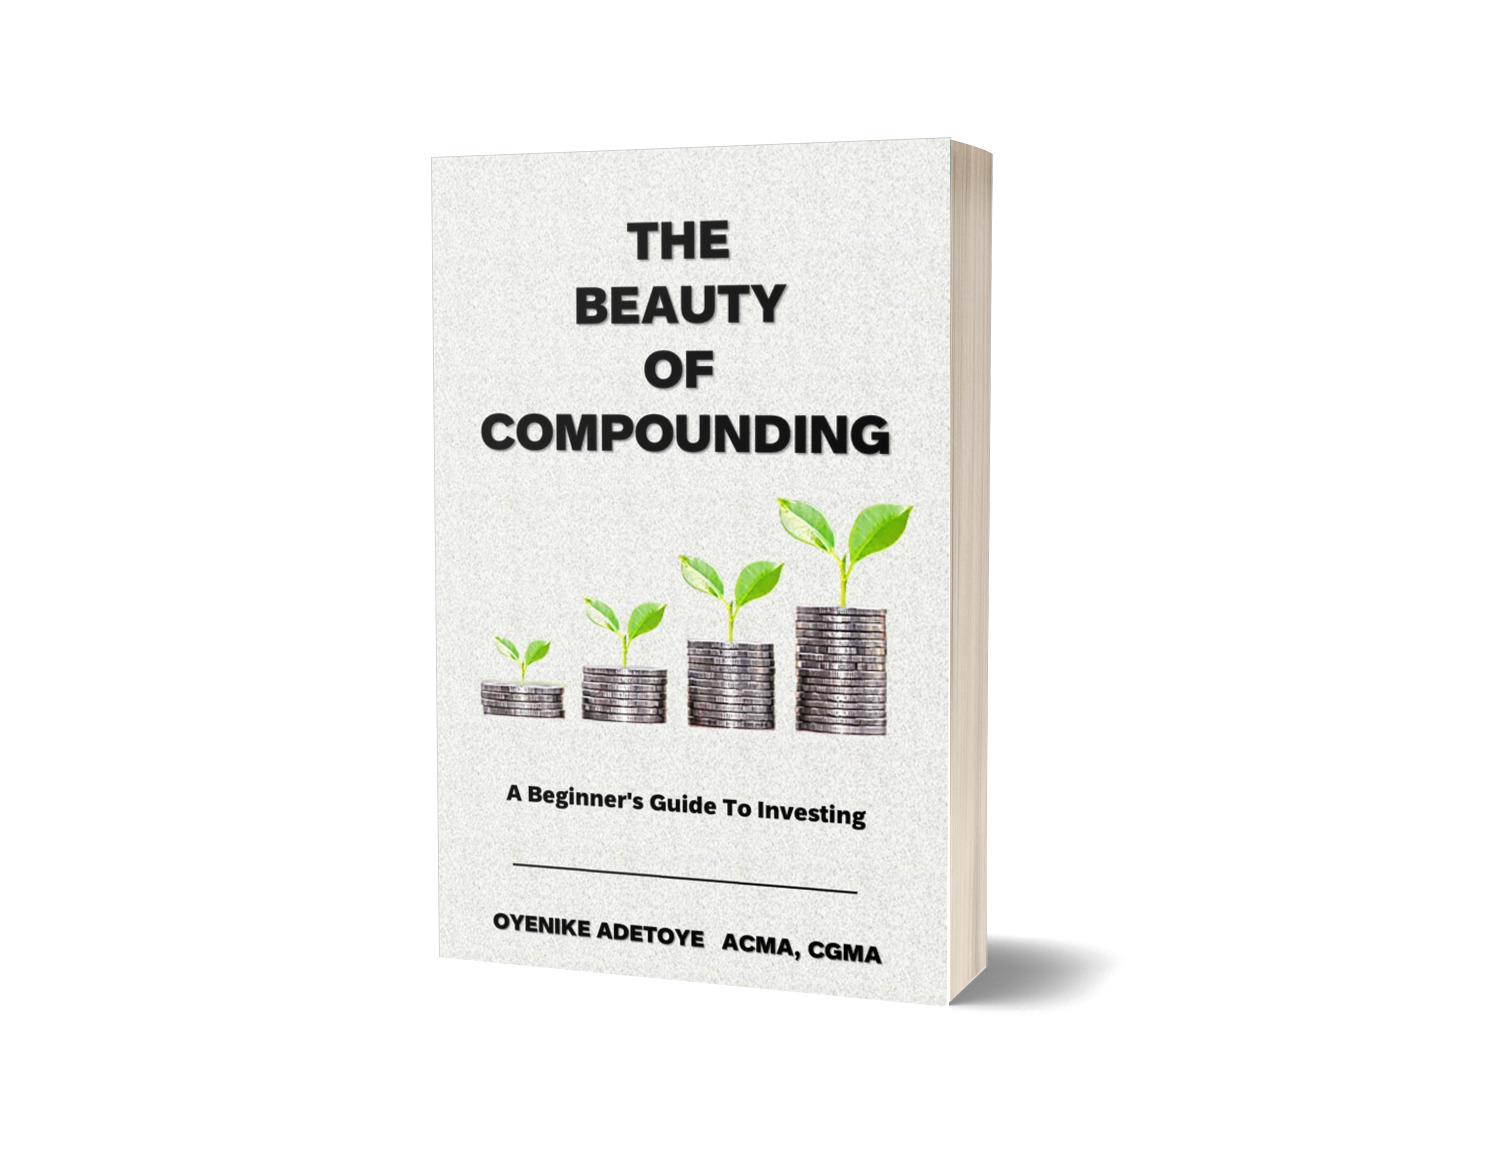 The Beauty of Compounding